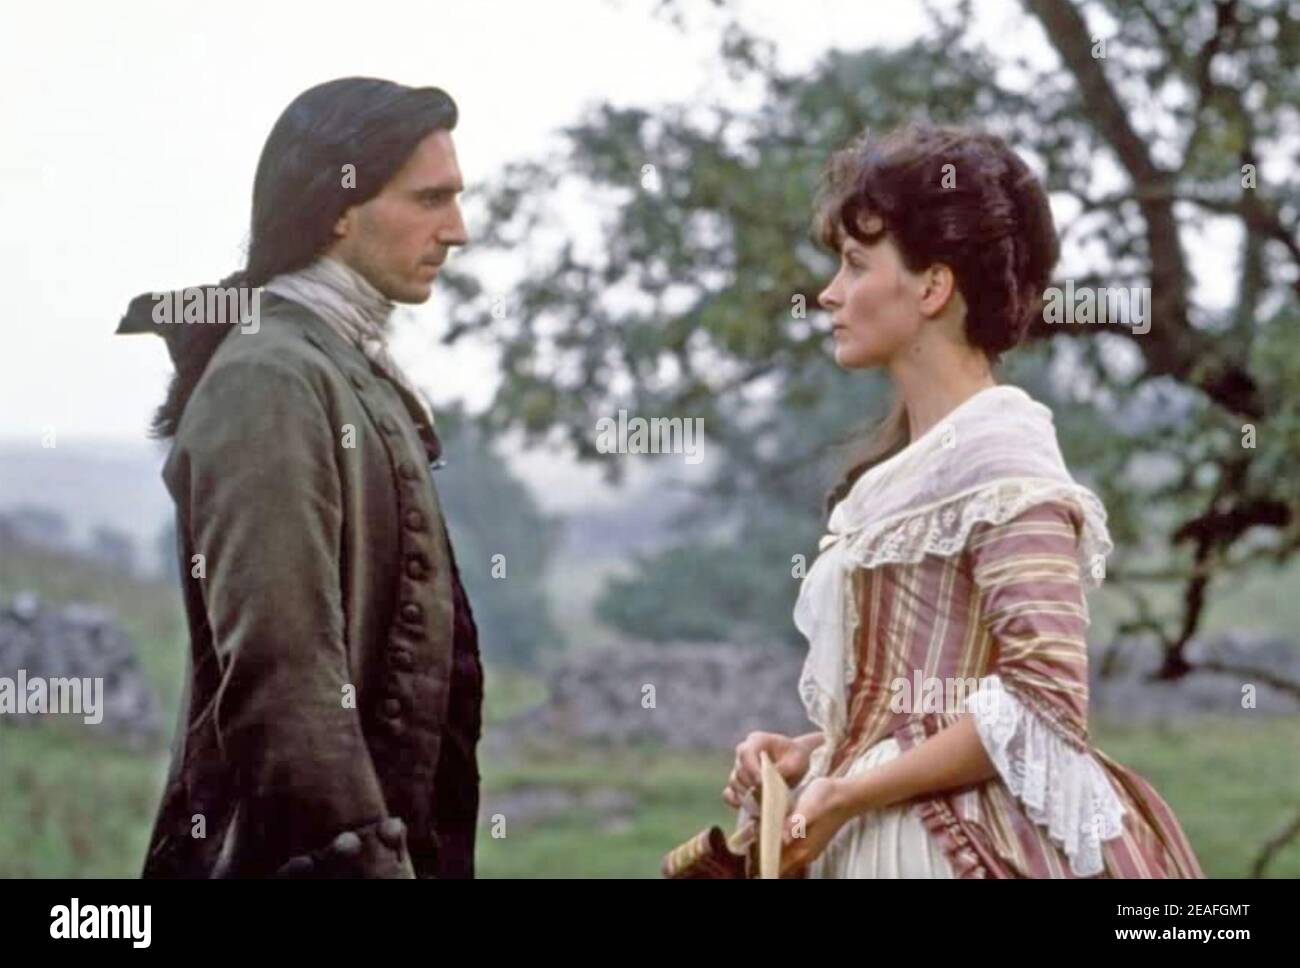 EMILY BRONTË'S WUTHERING HEIGHTS 1992 Paramount Pictures film with Ralph Fiennes and Juliette Binoche Stock Photo